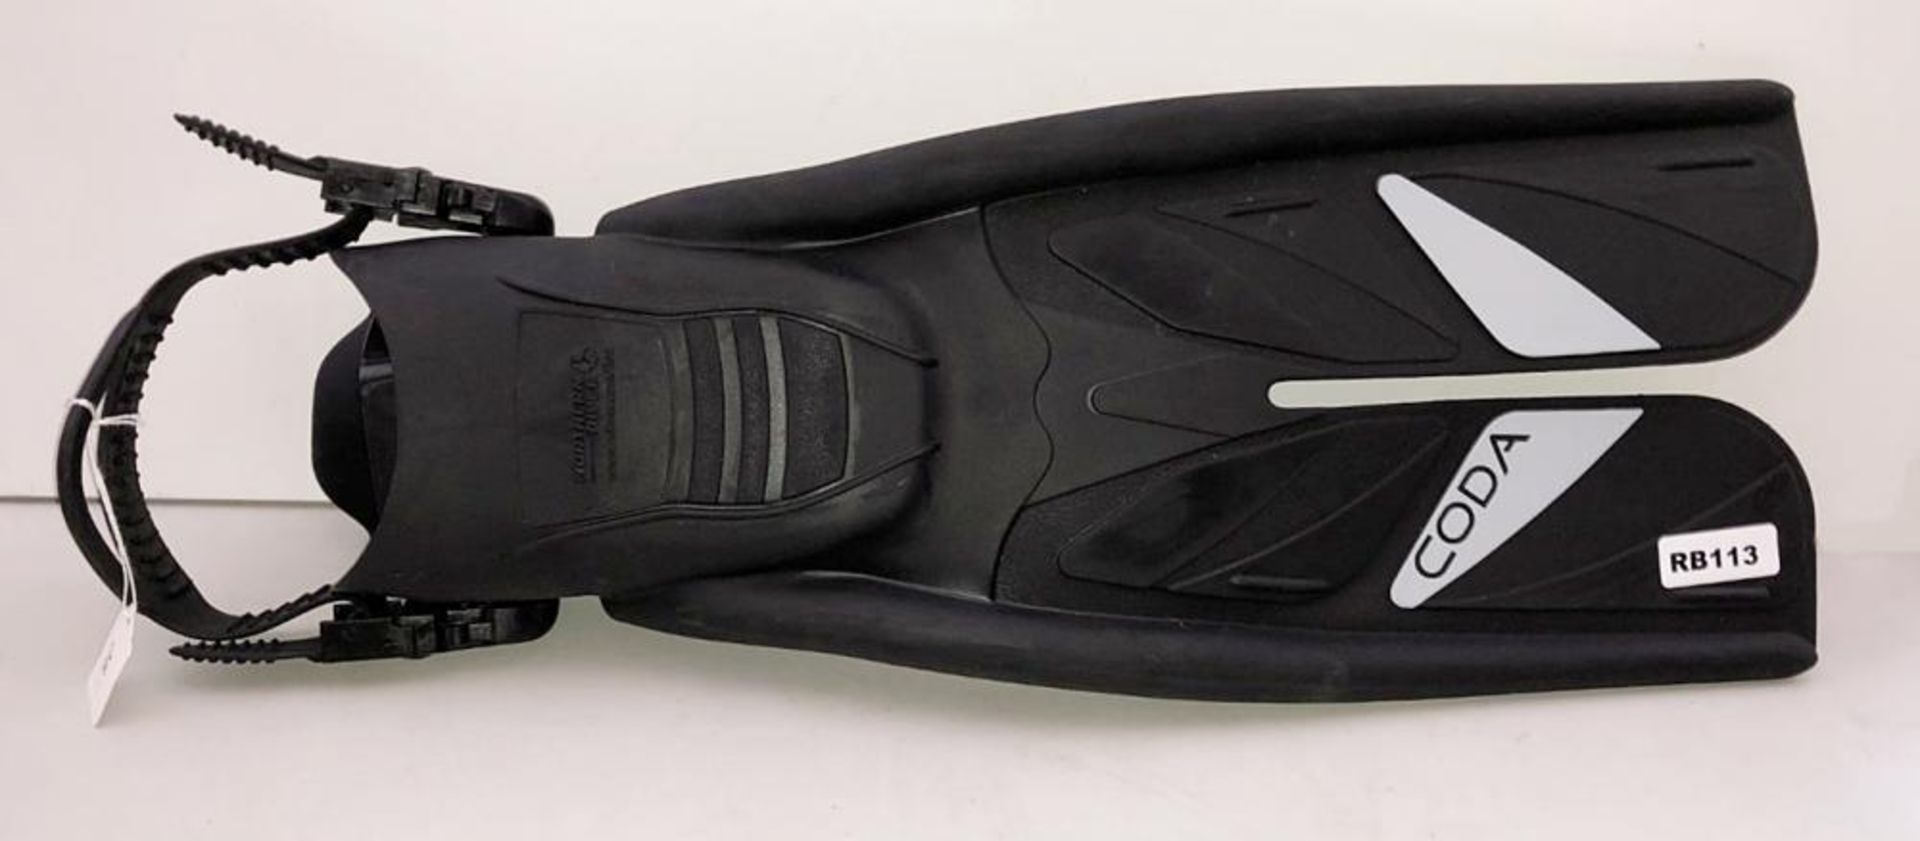 A Pair Of New XL Coda Dual Diving Fins - Ref: RB112, RB113 - CL349 - Location: Altrincham WA14 - RRP - Image 2 of 8